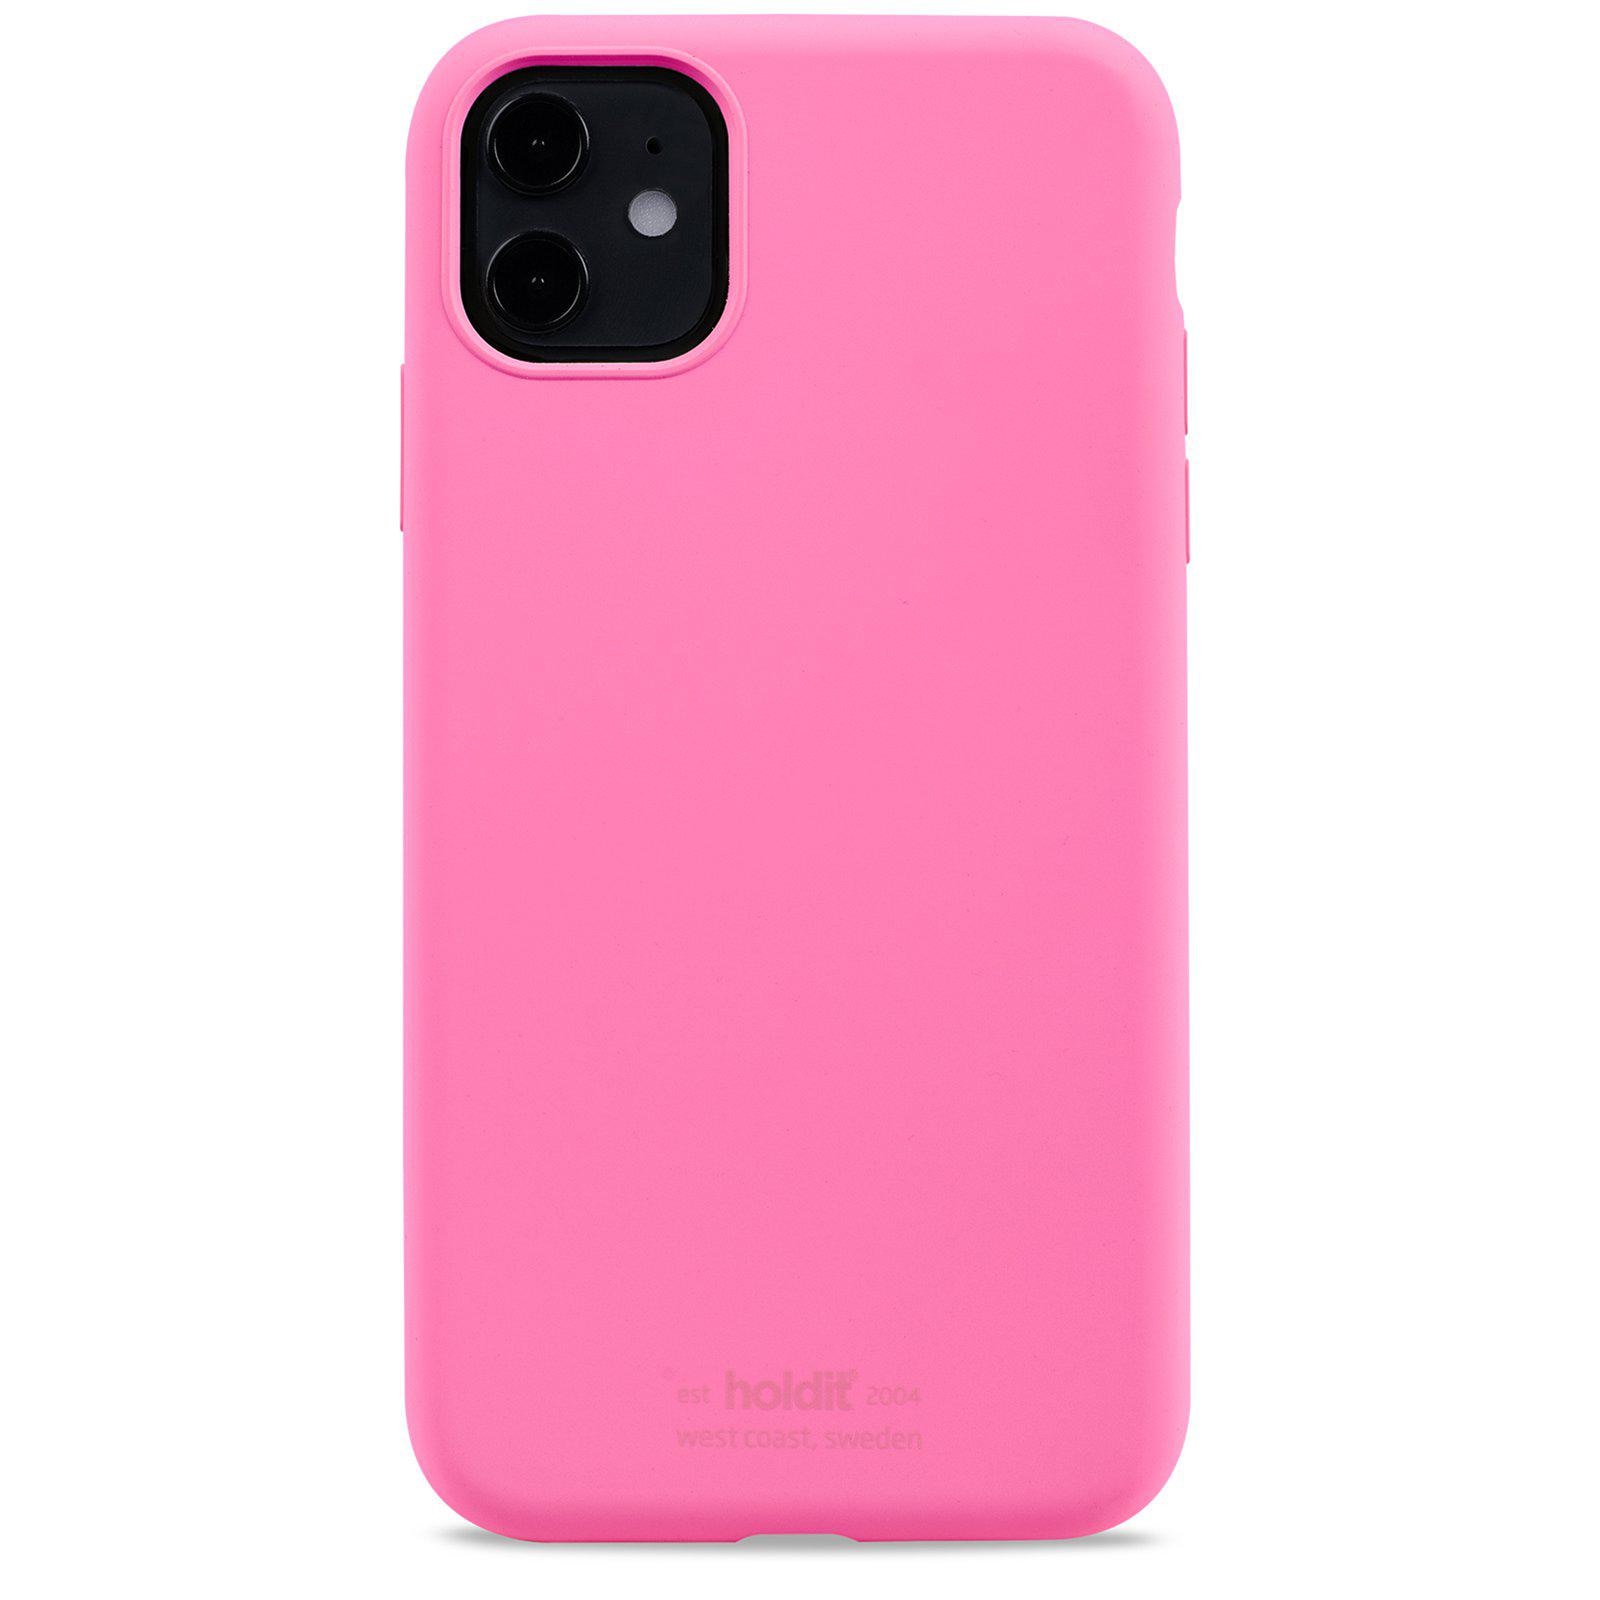 iPhone 11/XR Silicone Case, Bright Pink